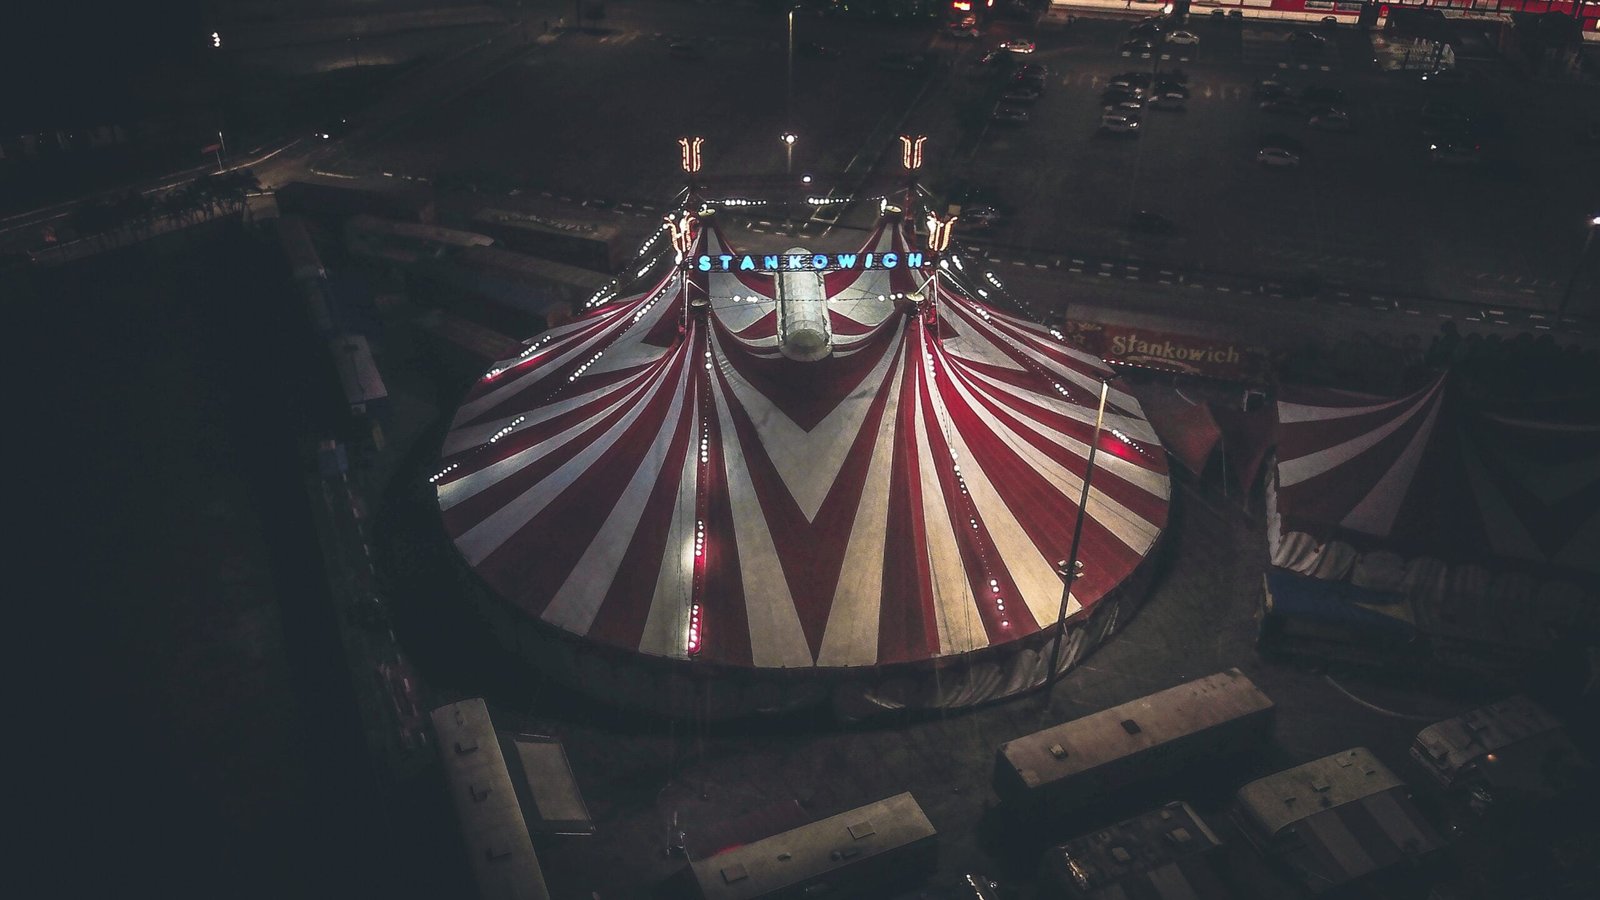 A circus tent seen from above